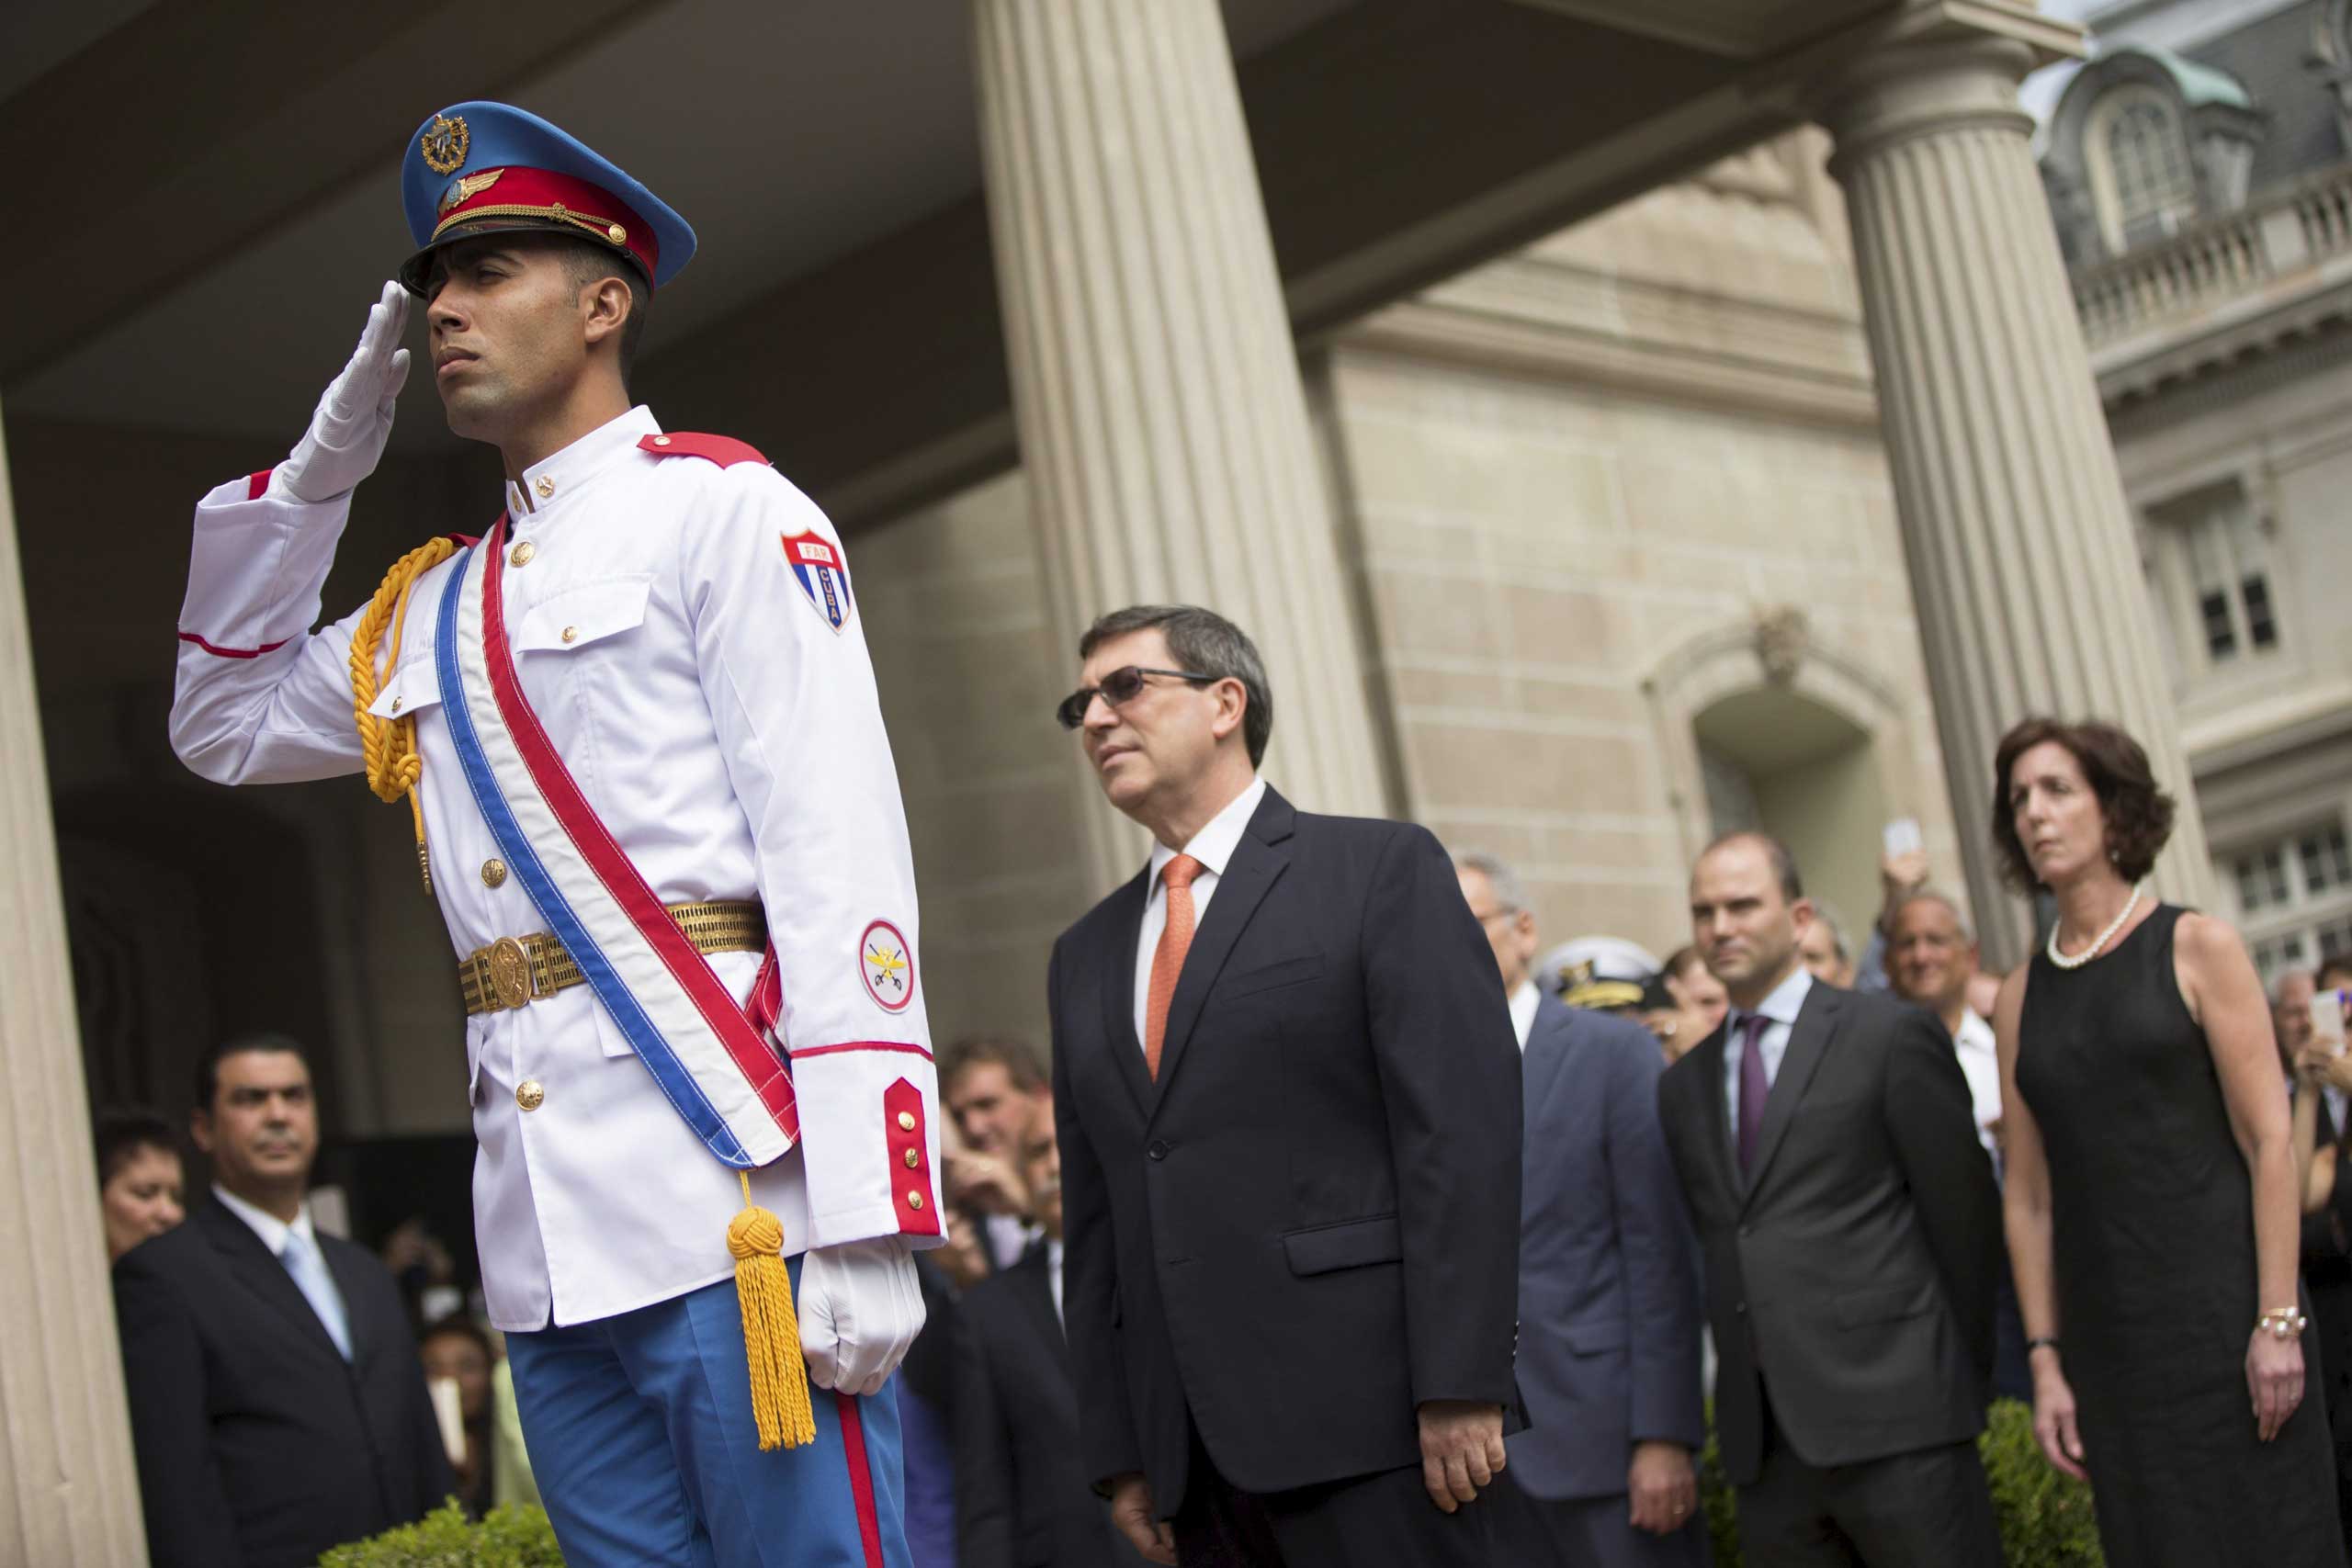 A member of a Cuban honor guard salutes as Cuban Foreign Minister Bruno Rodriguez prepares to raise the Cuban flag over their new embassy in Washington, on July 20, 2015.